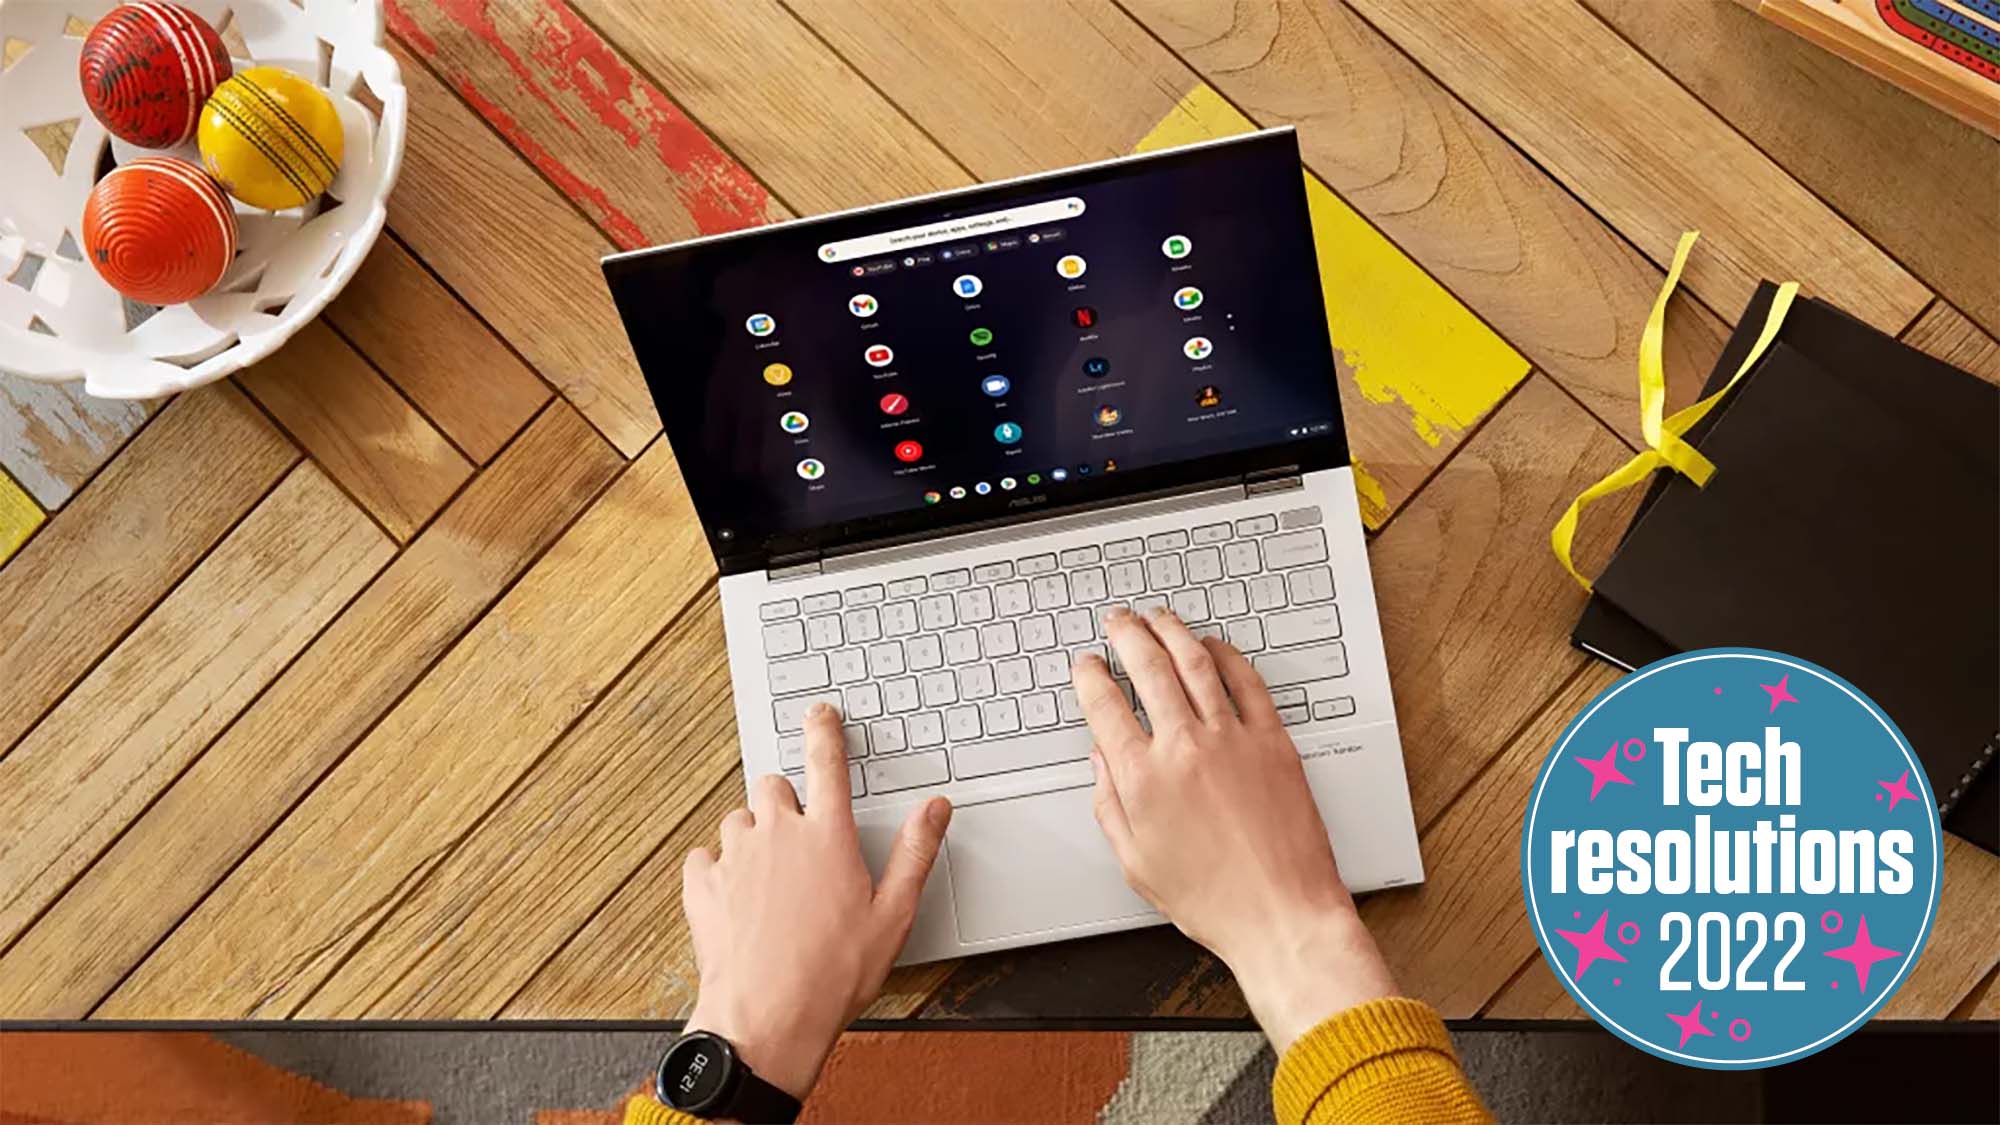 Someone using an Asus Chromebook with a TechRadar Tech Resolutions 2022 badge in the corner